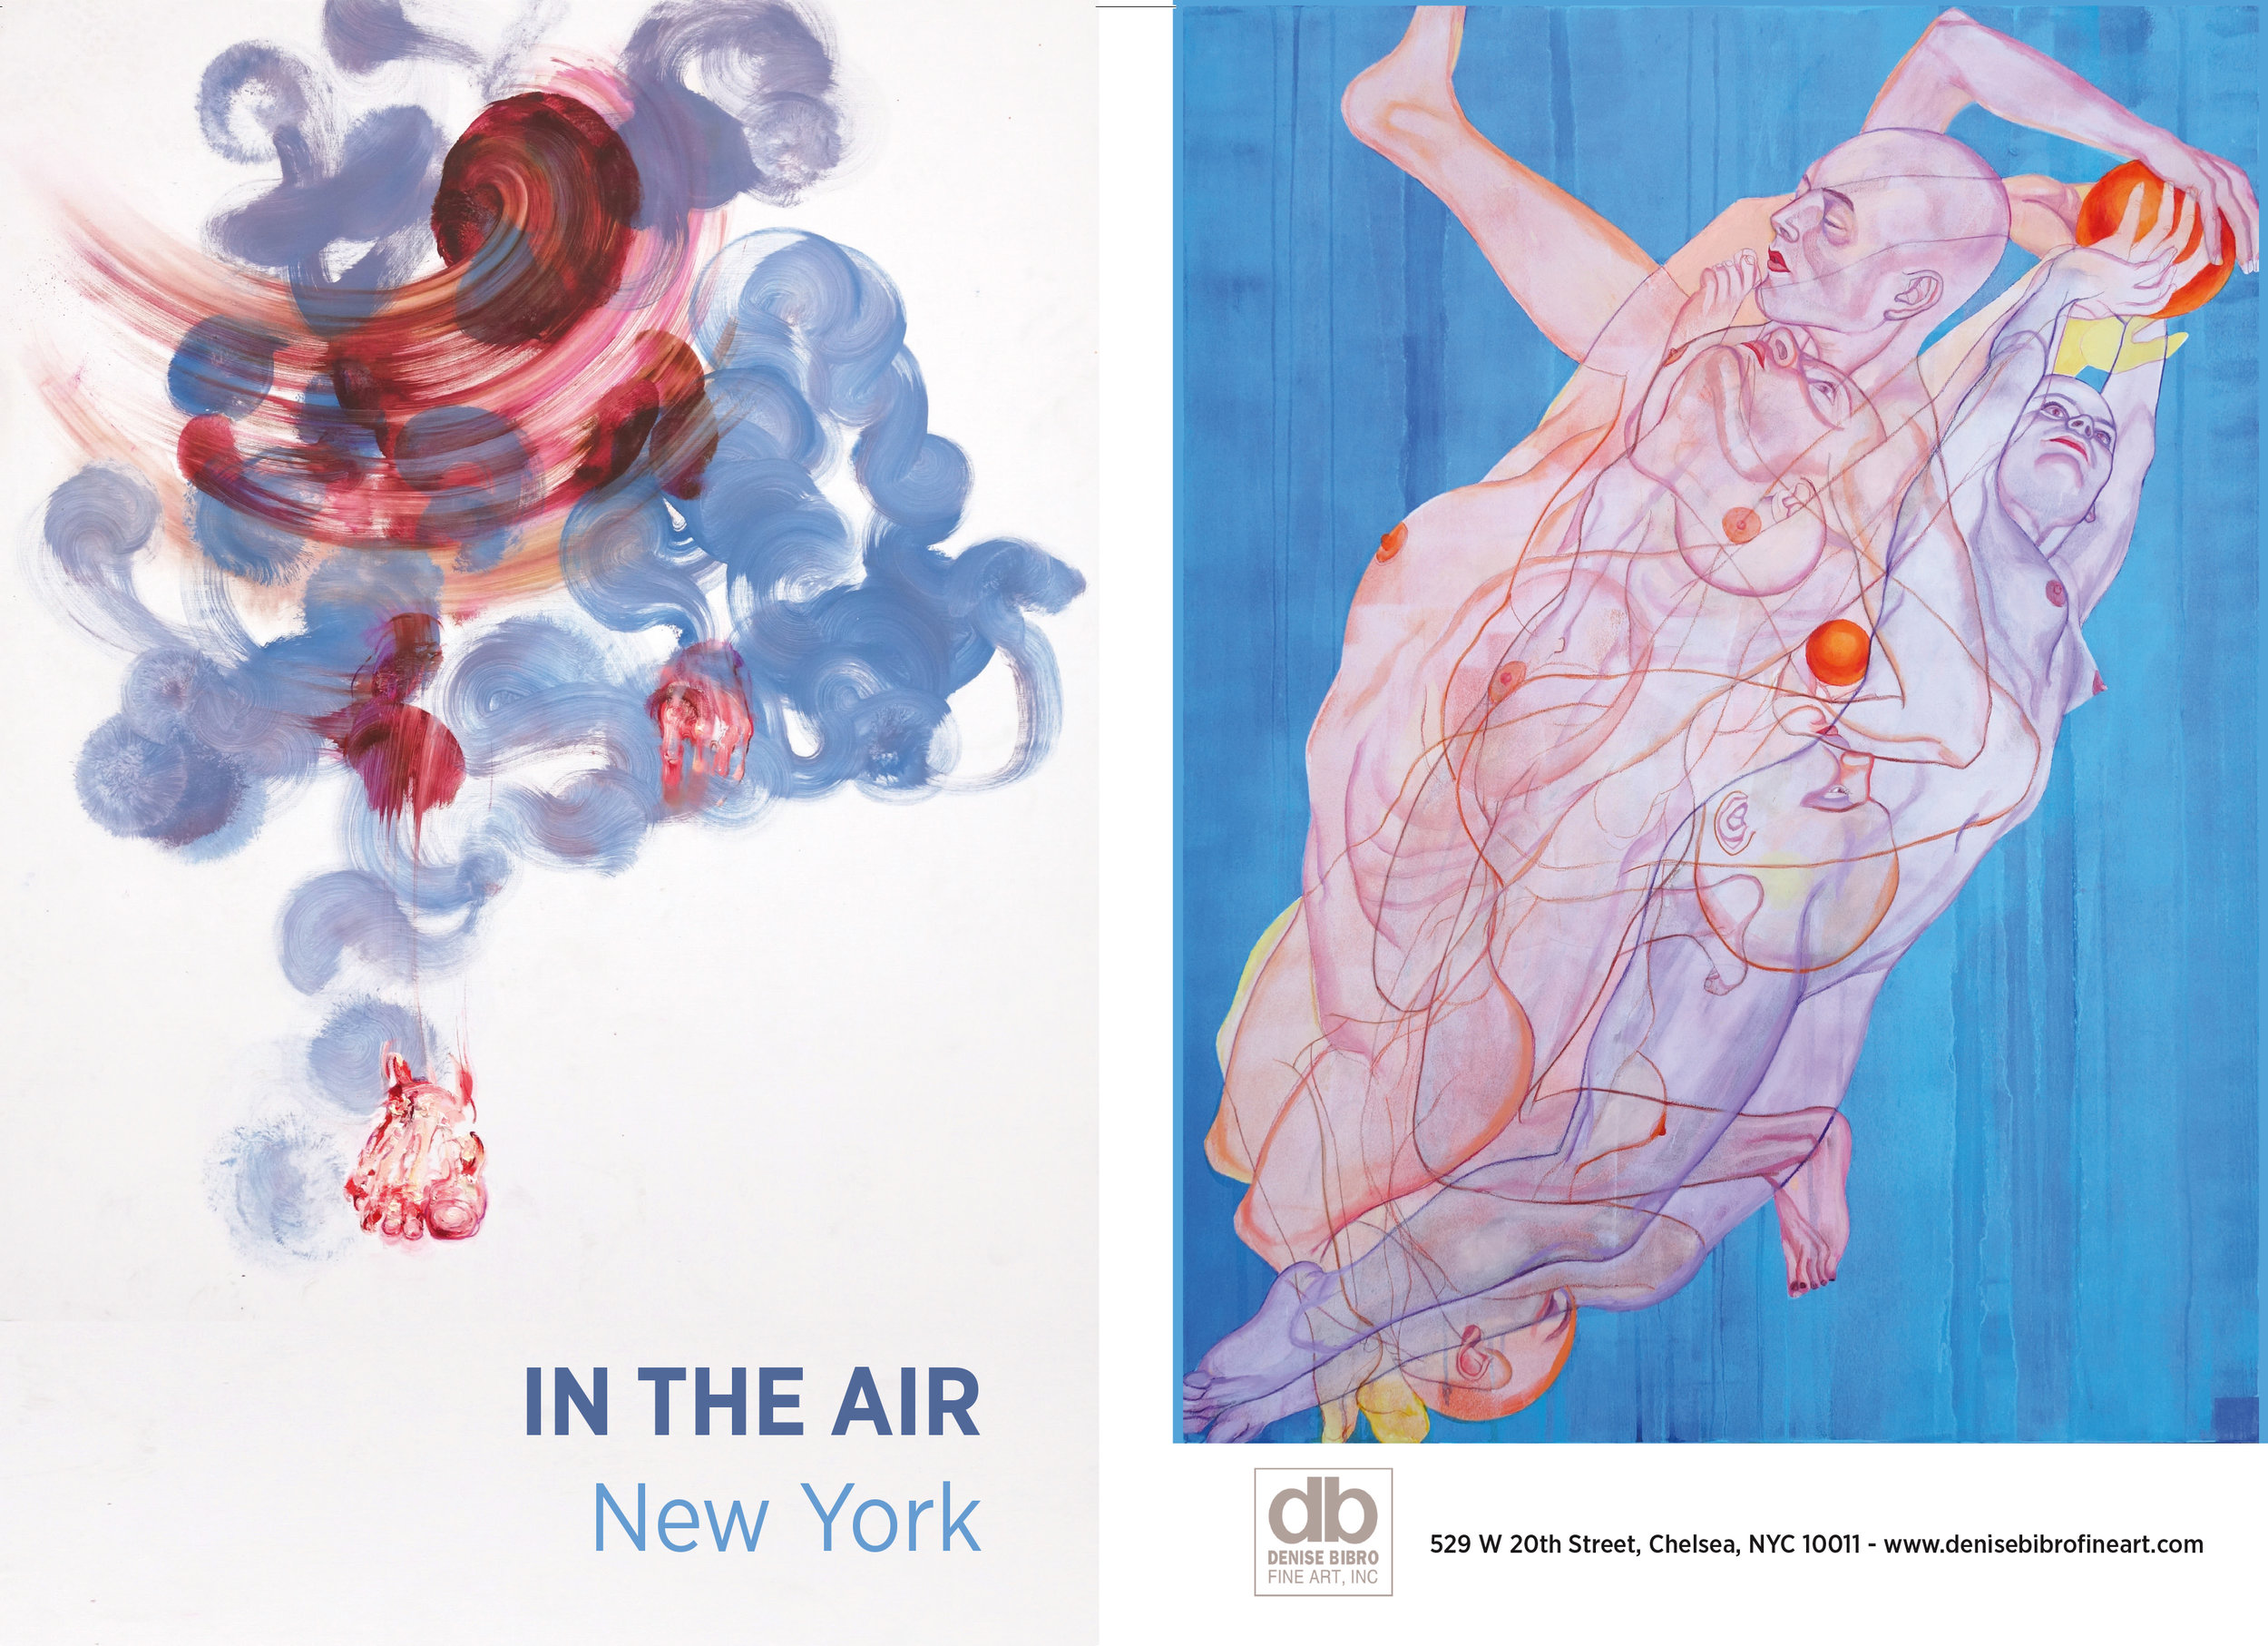 IN THE AIR: New York